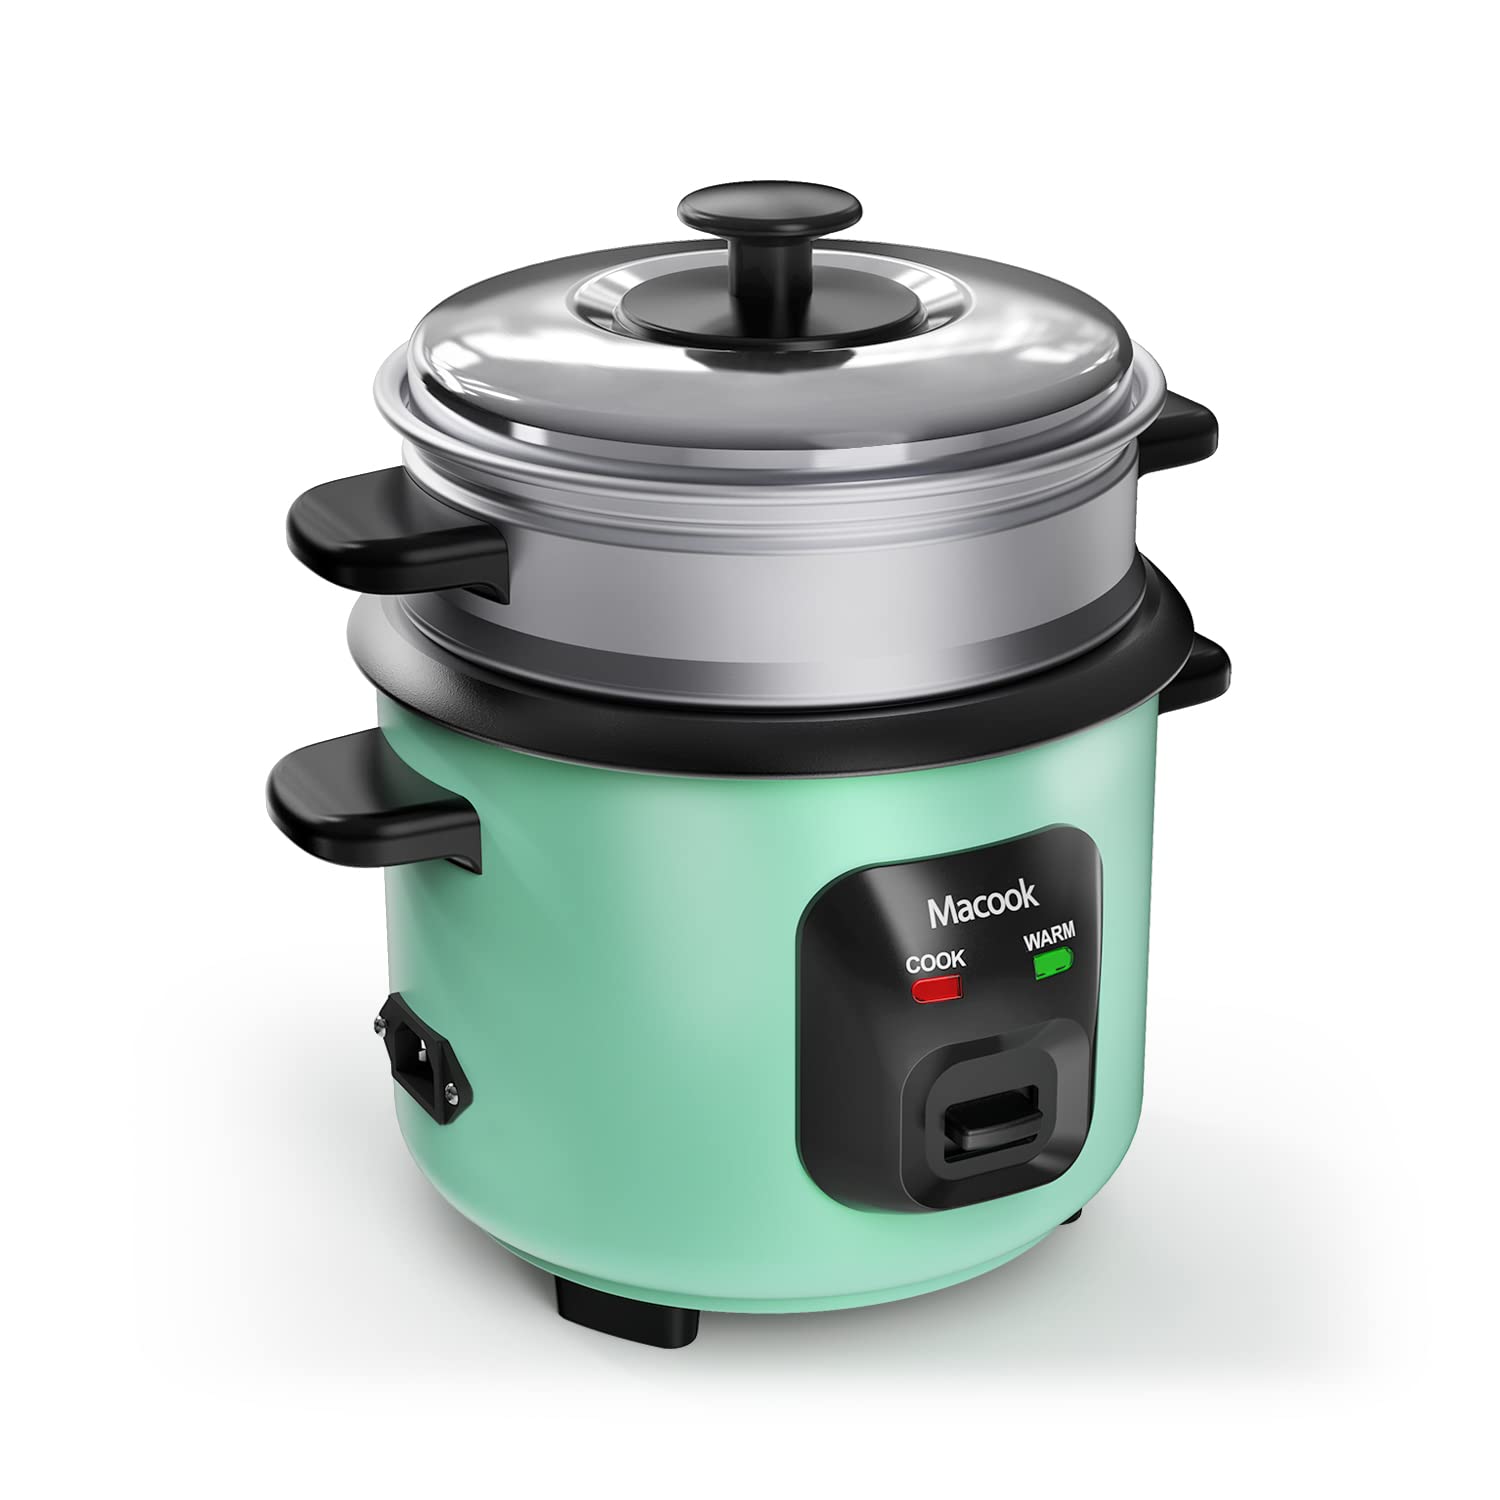 Macook-Electric-Rice-Cooker